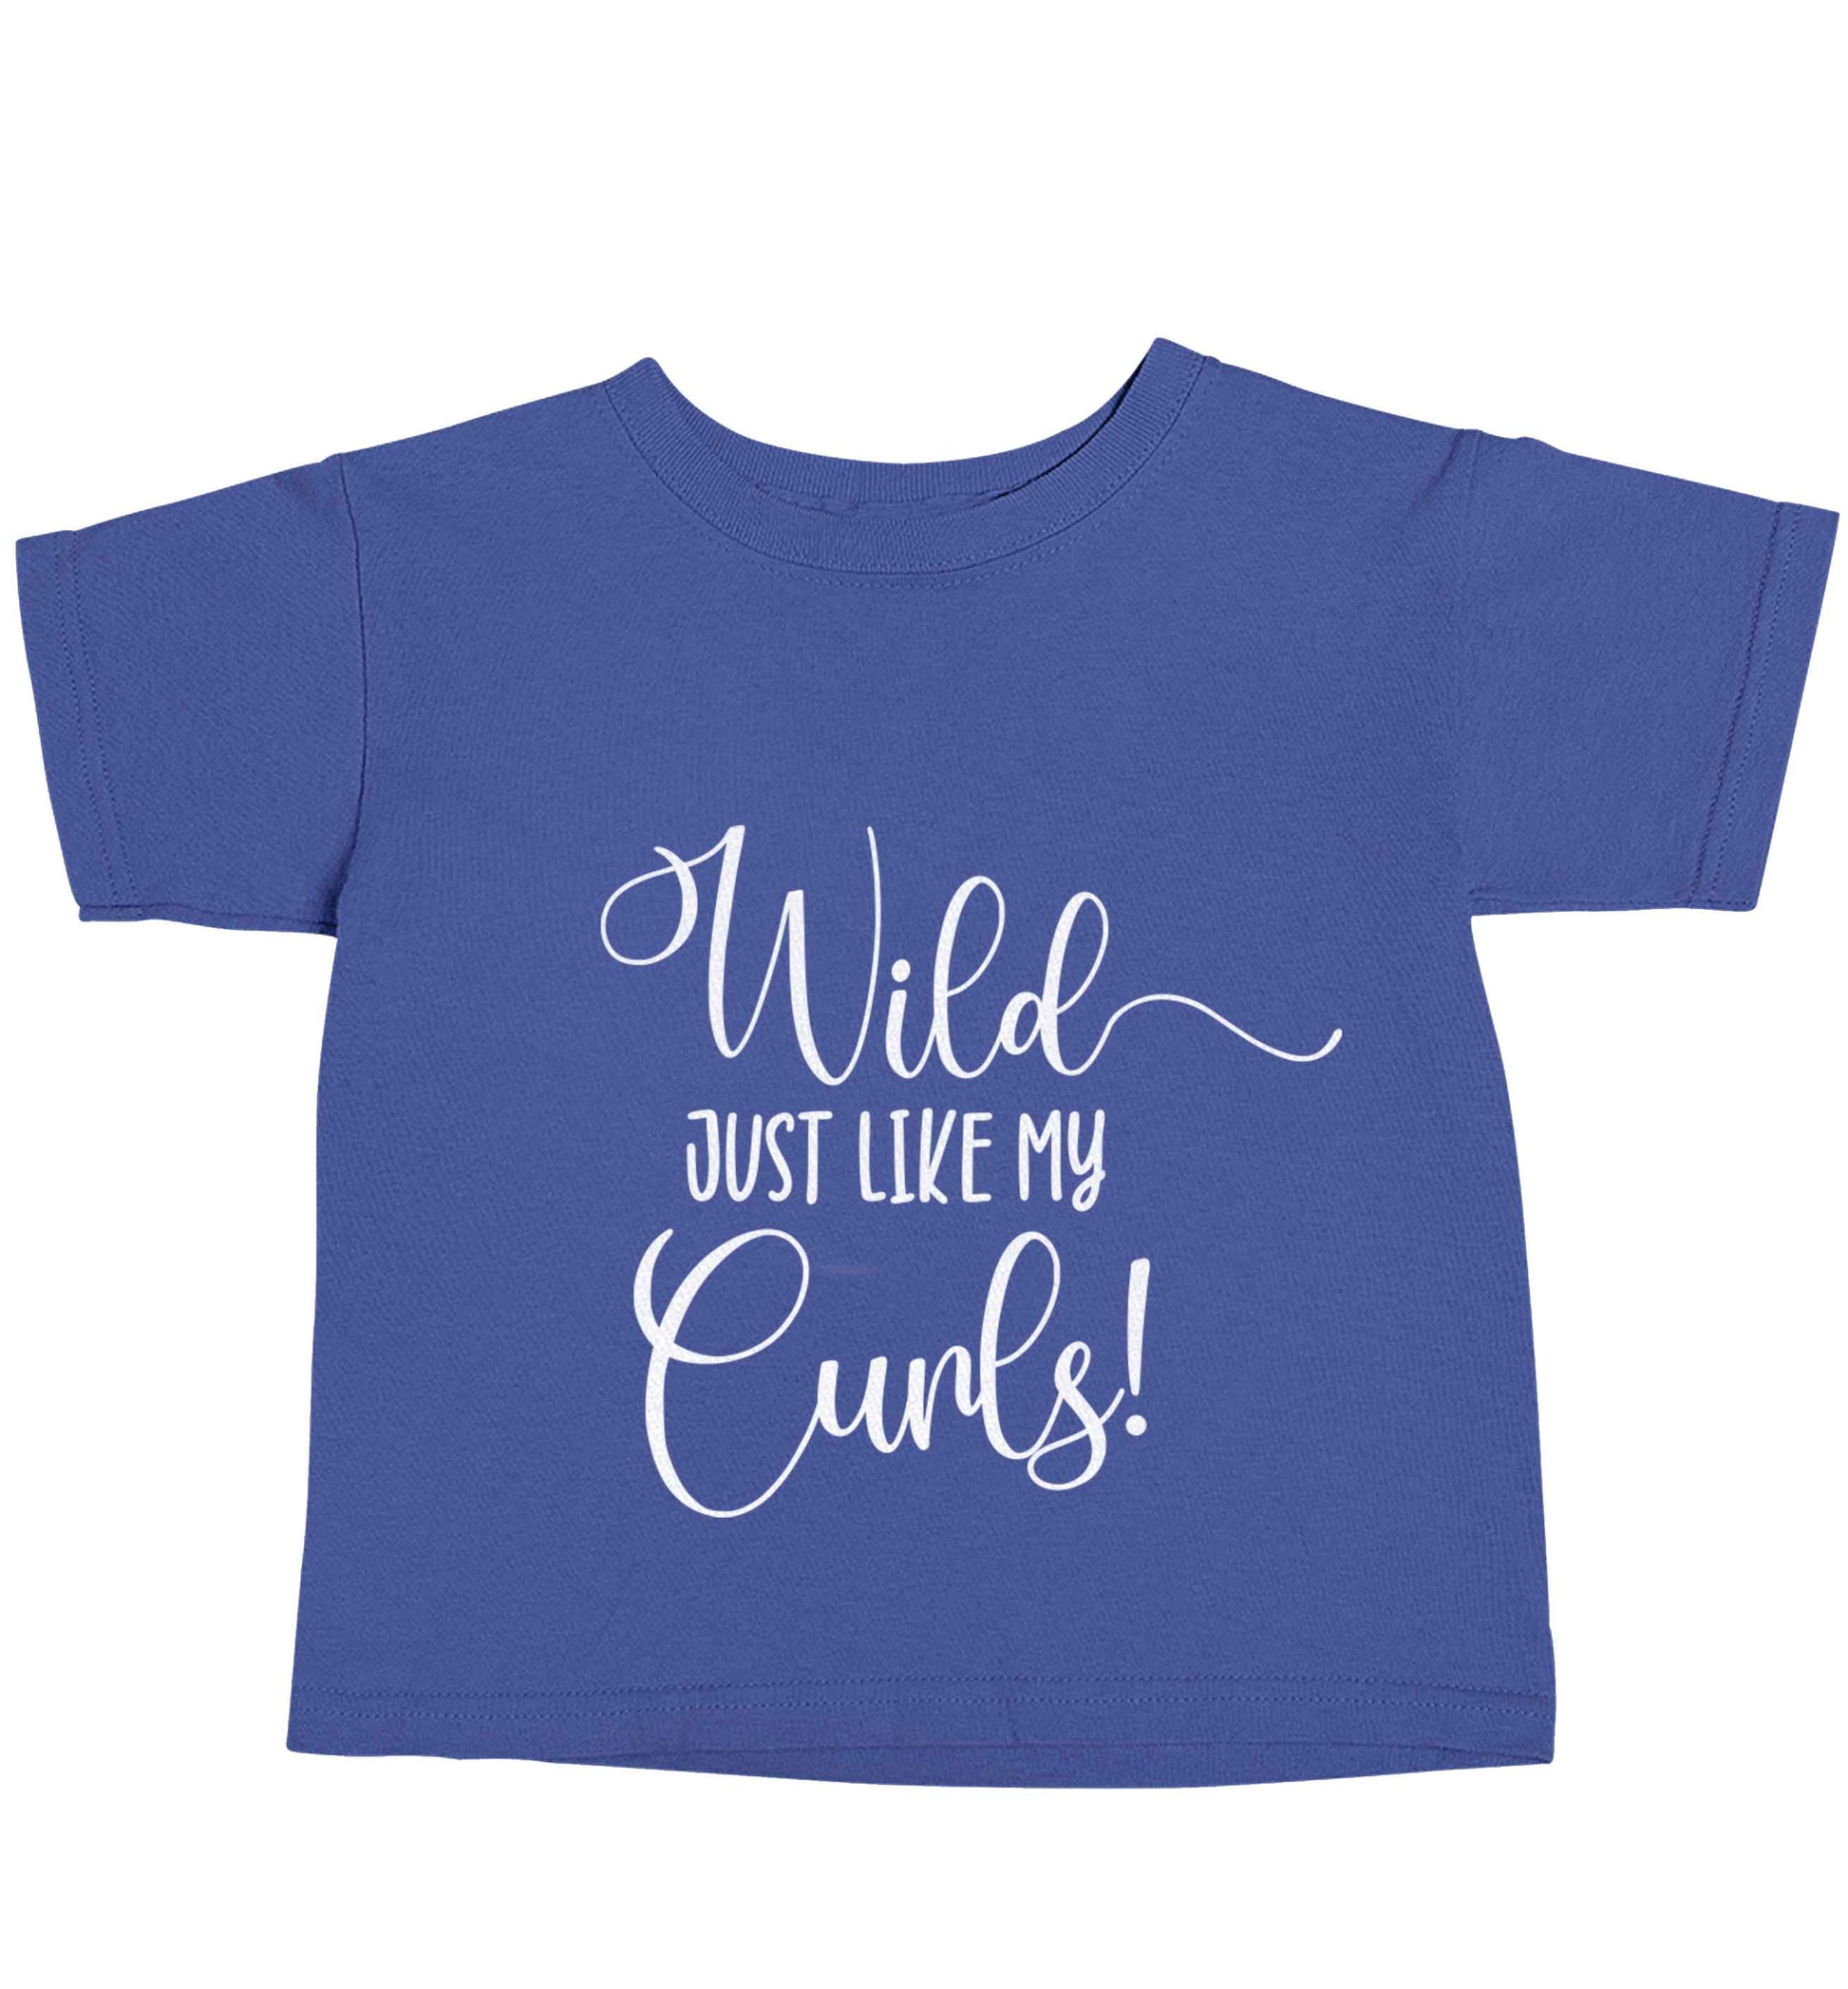 Wild just like my curls blue baby toddler Tshirt 2 Years